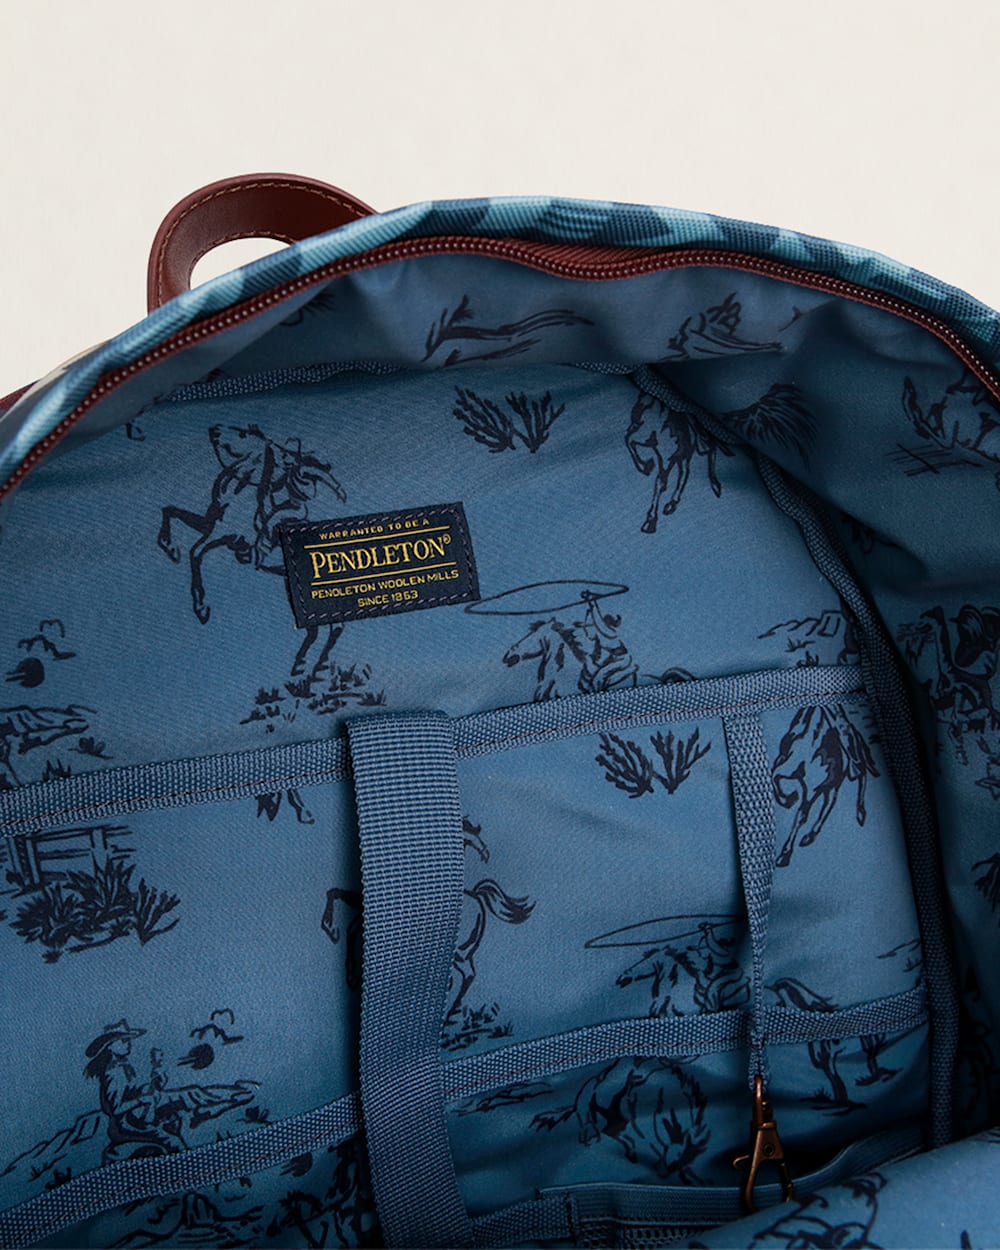 ALTERNATE VIEW OF CARICO LAKE TRAVEL BACKPACK IN BLUE image number 2